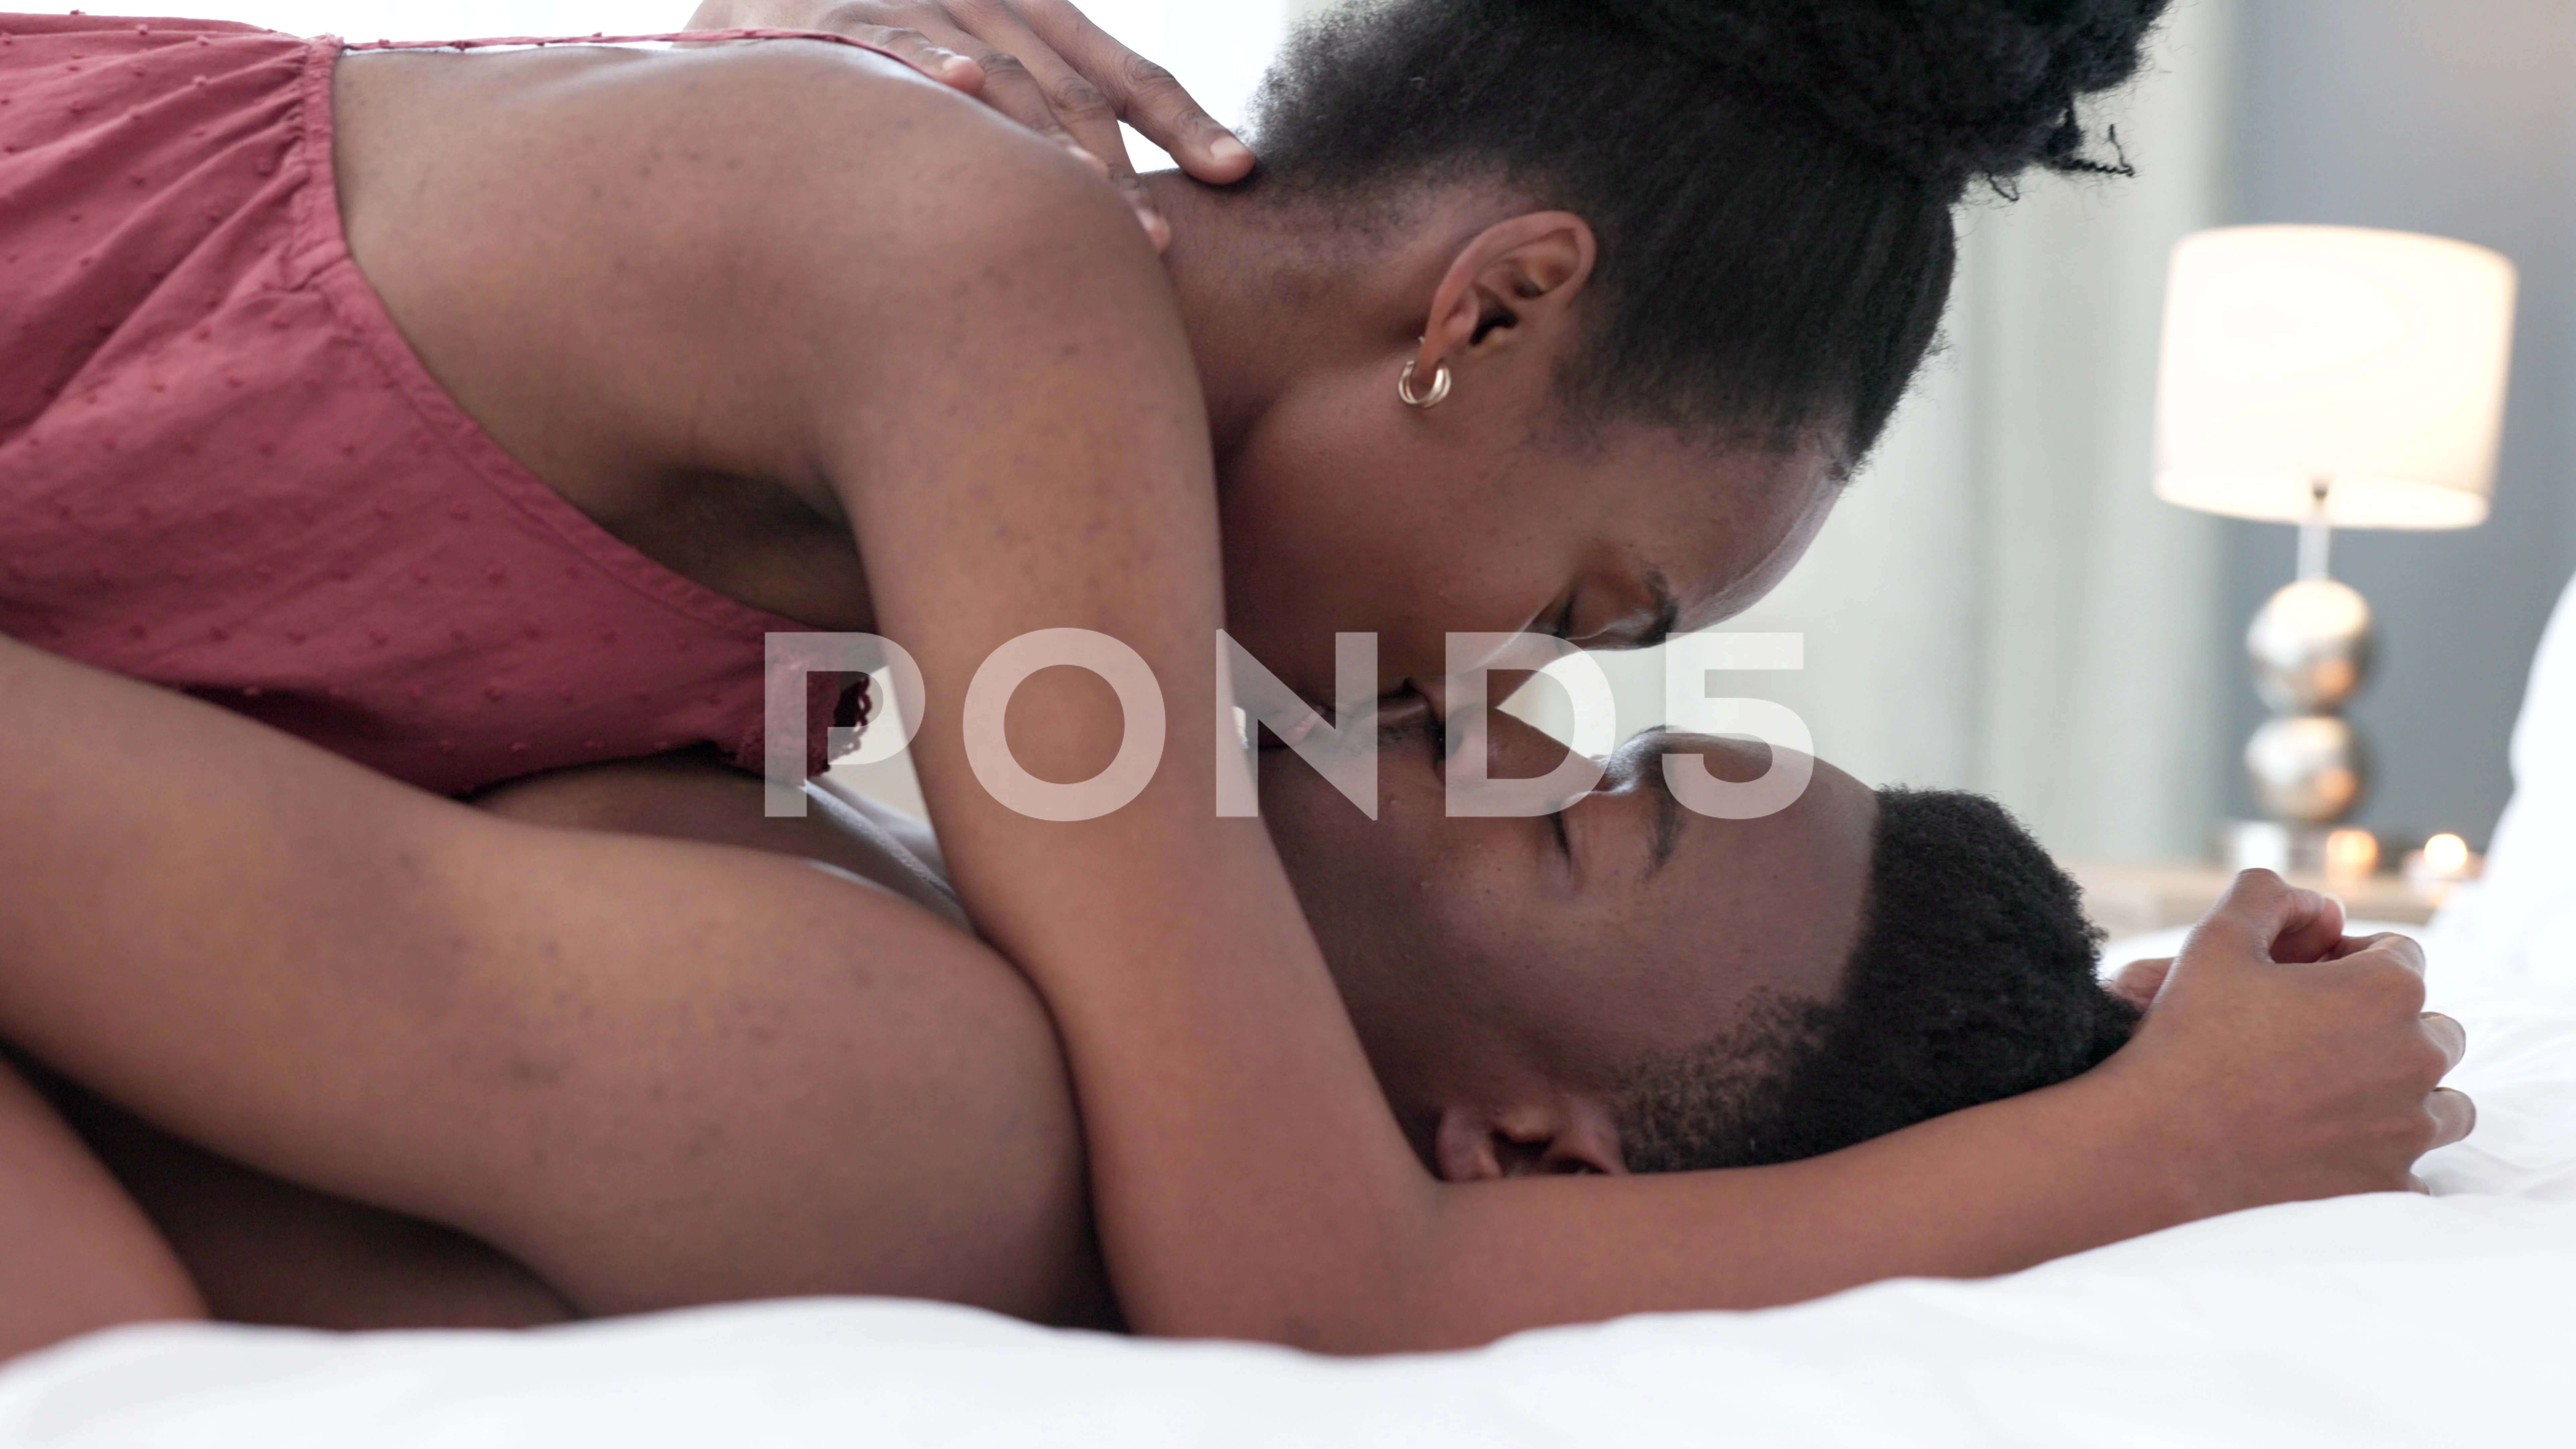 alex brawn recommends images of black couples making love pic